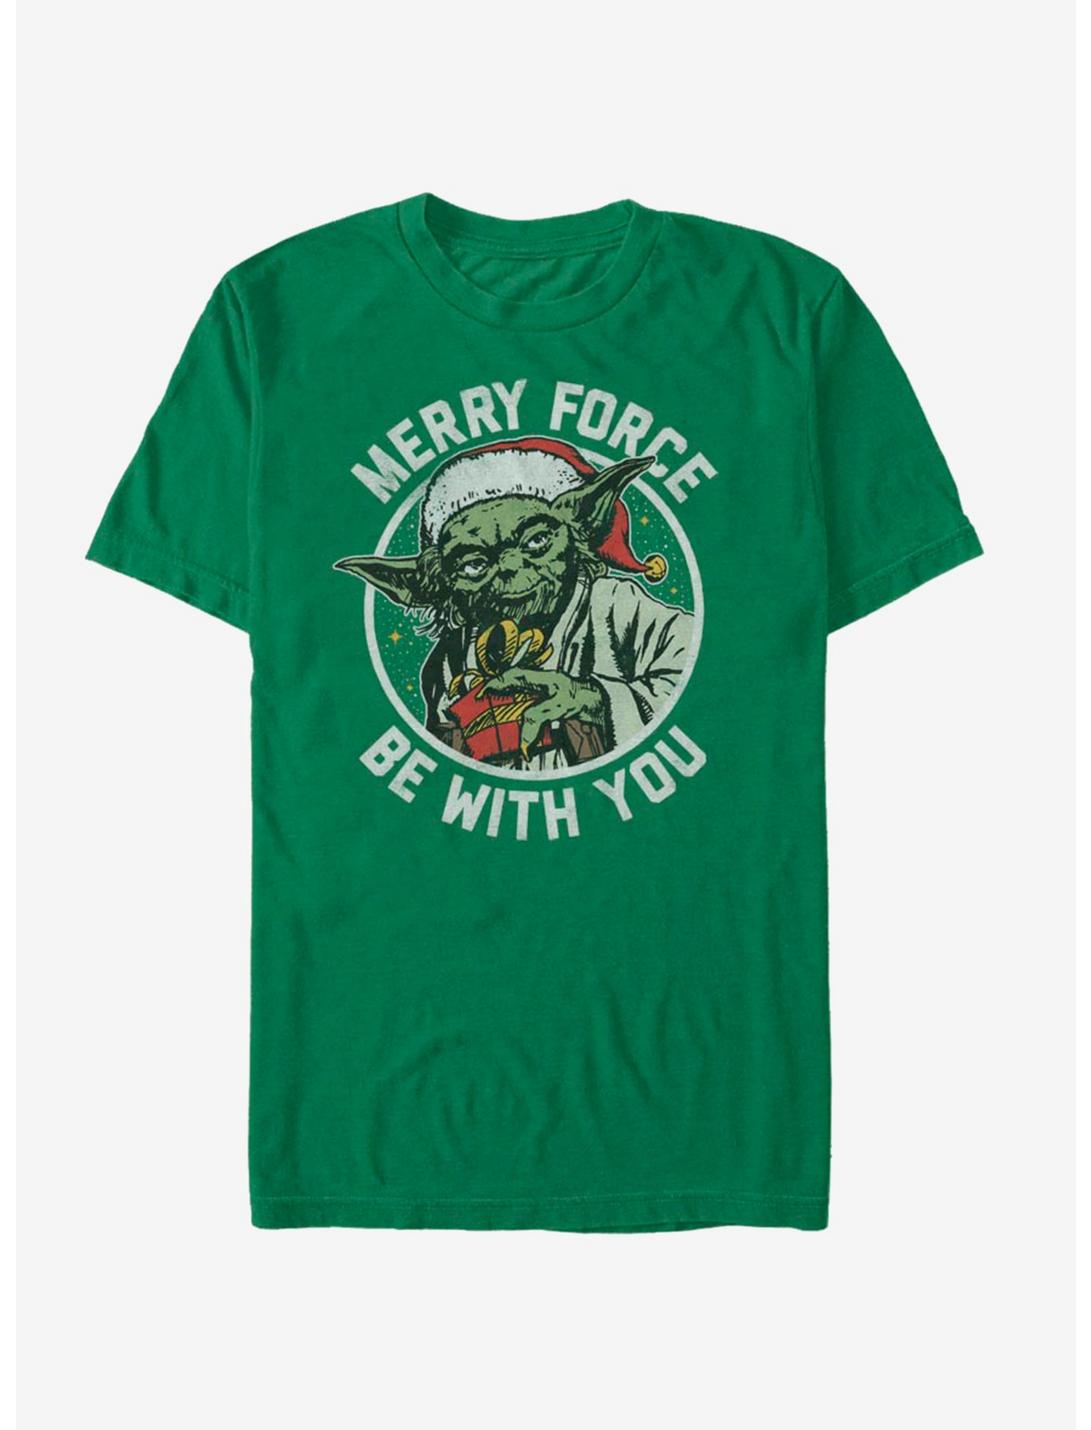 Star Wars Merry Force T-Shirt, KELLY, hi-res